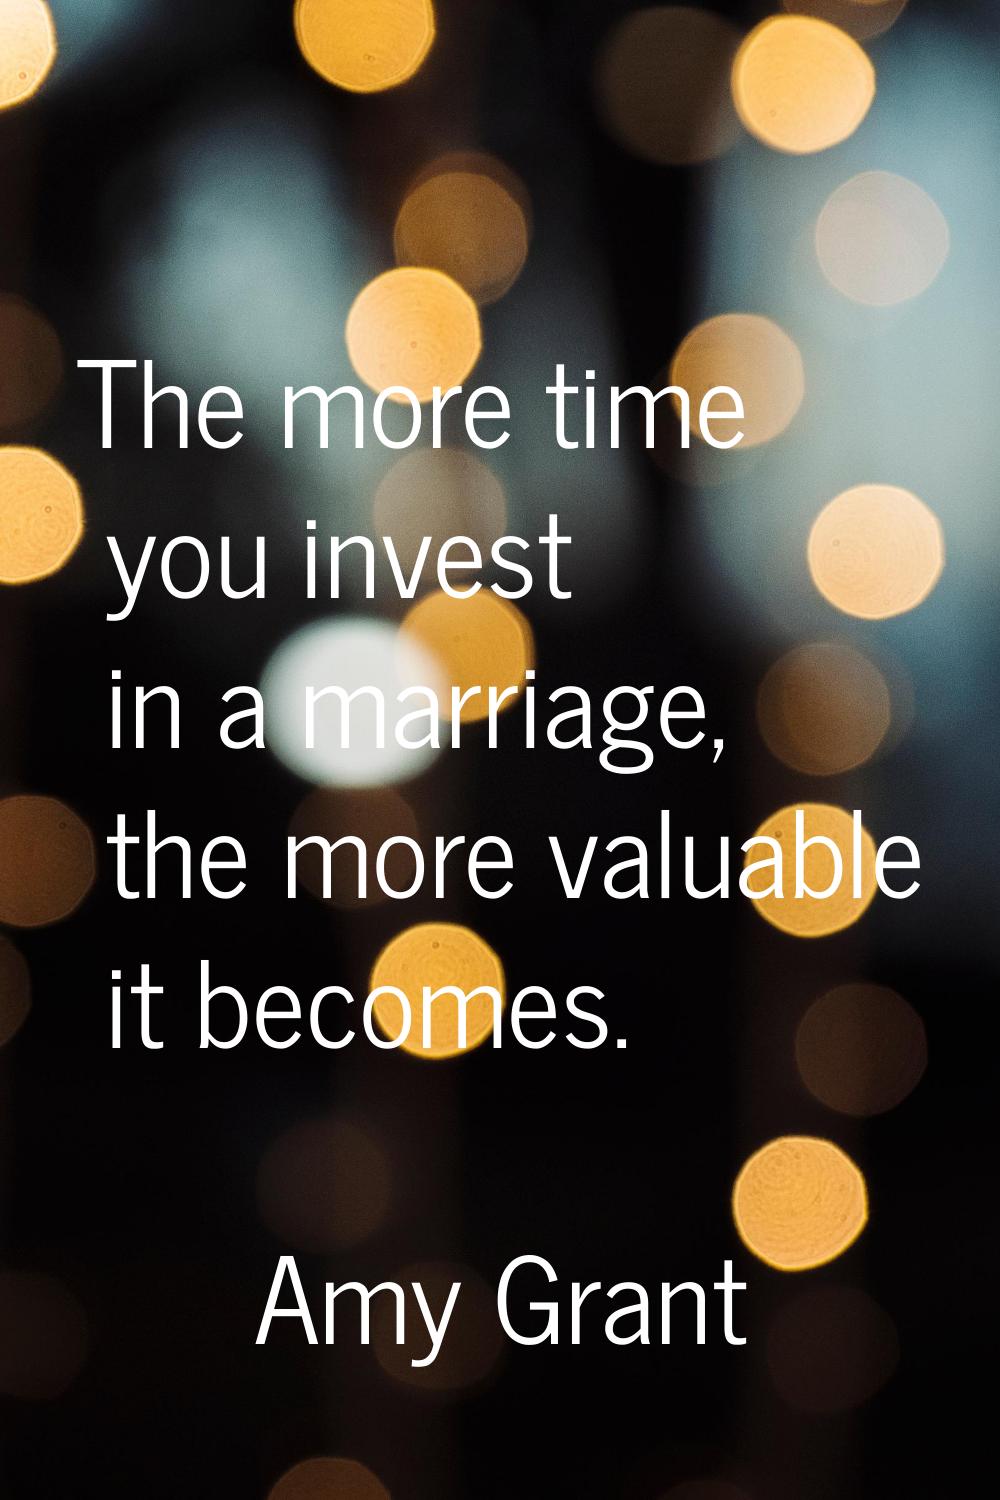 The more time you invest in a marriage, the more valuable it becomes.